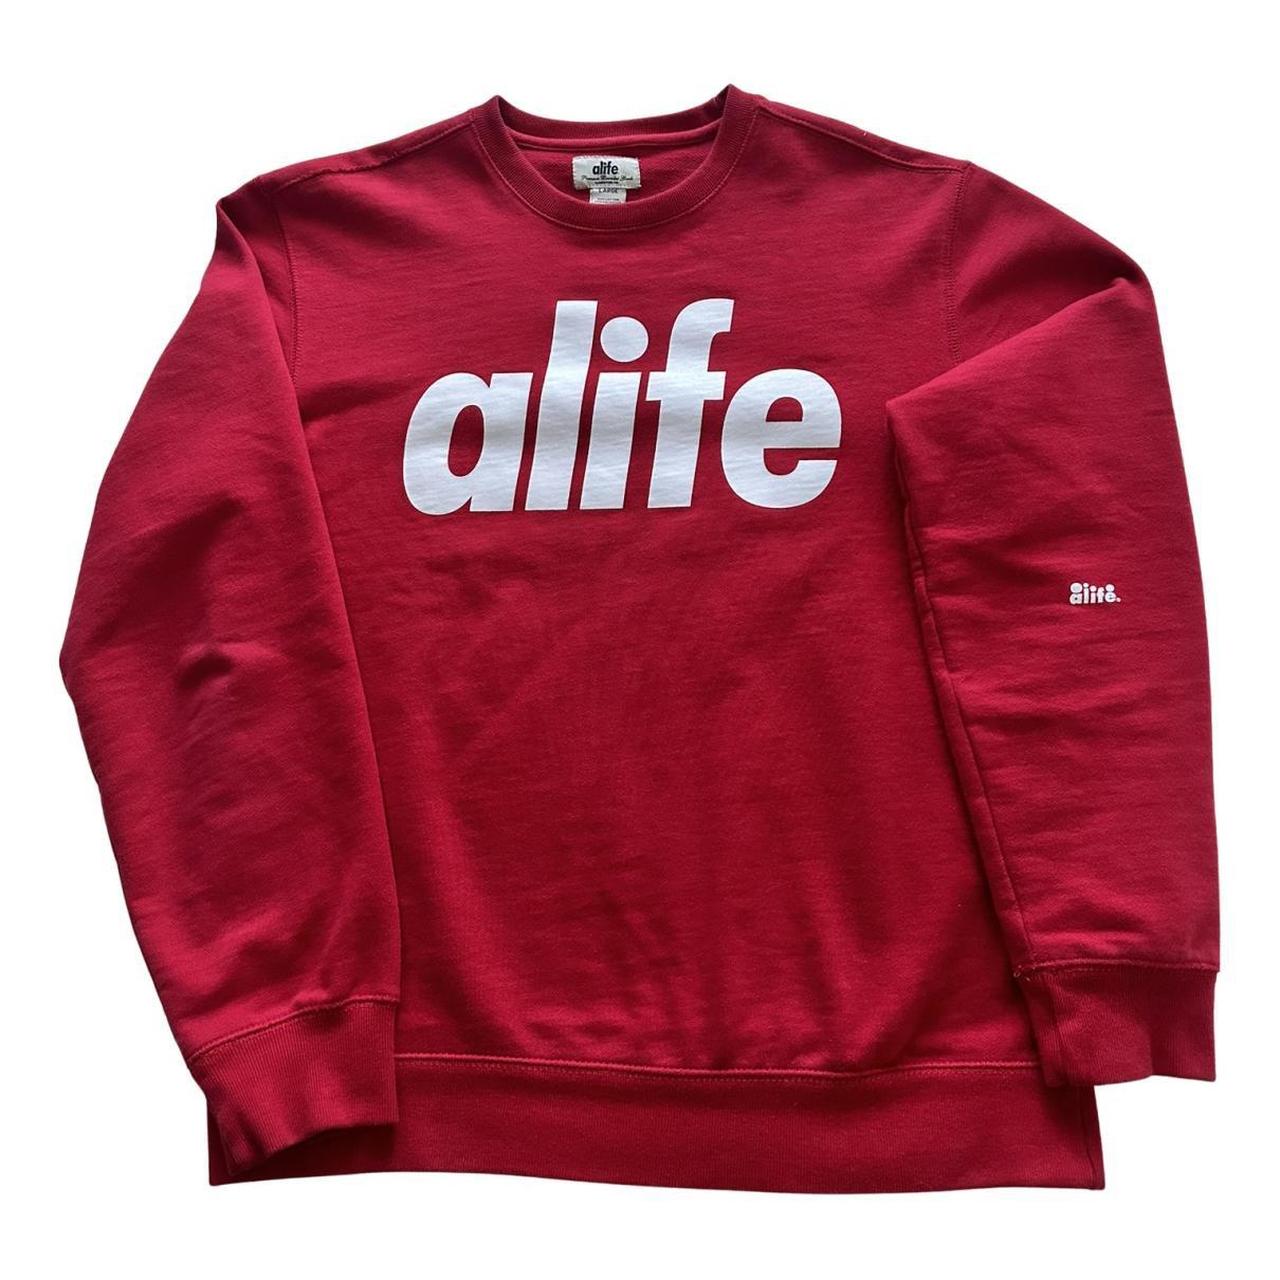 Alife | Preowned & Secondhand Fashion | Depop